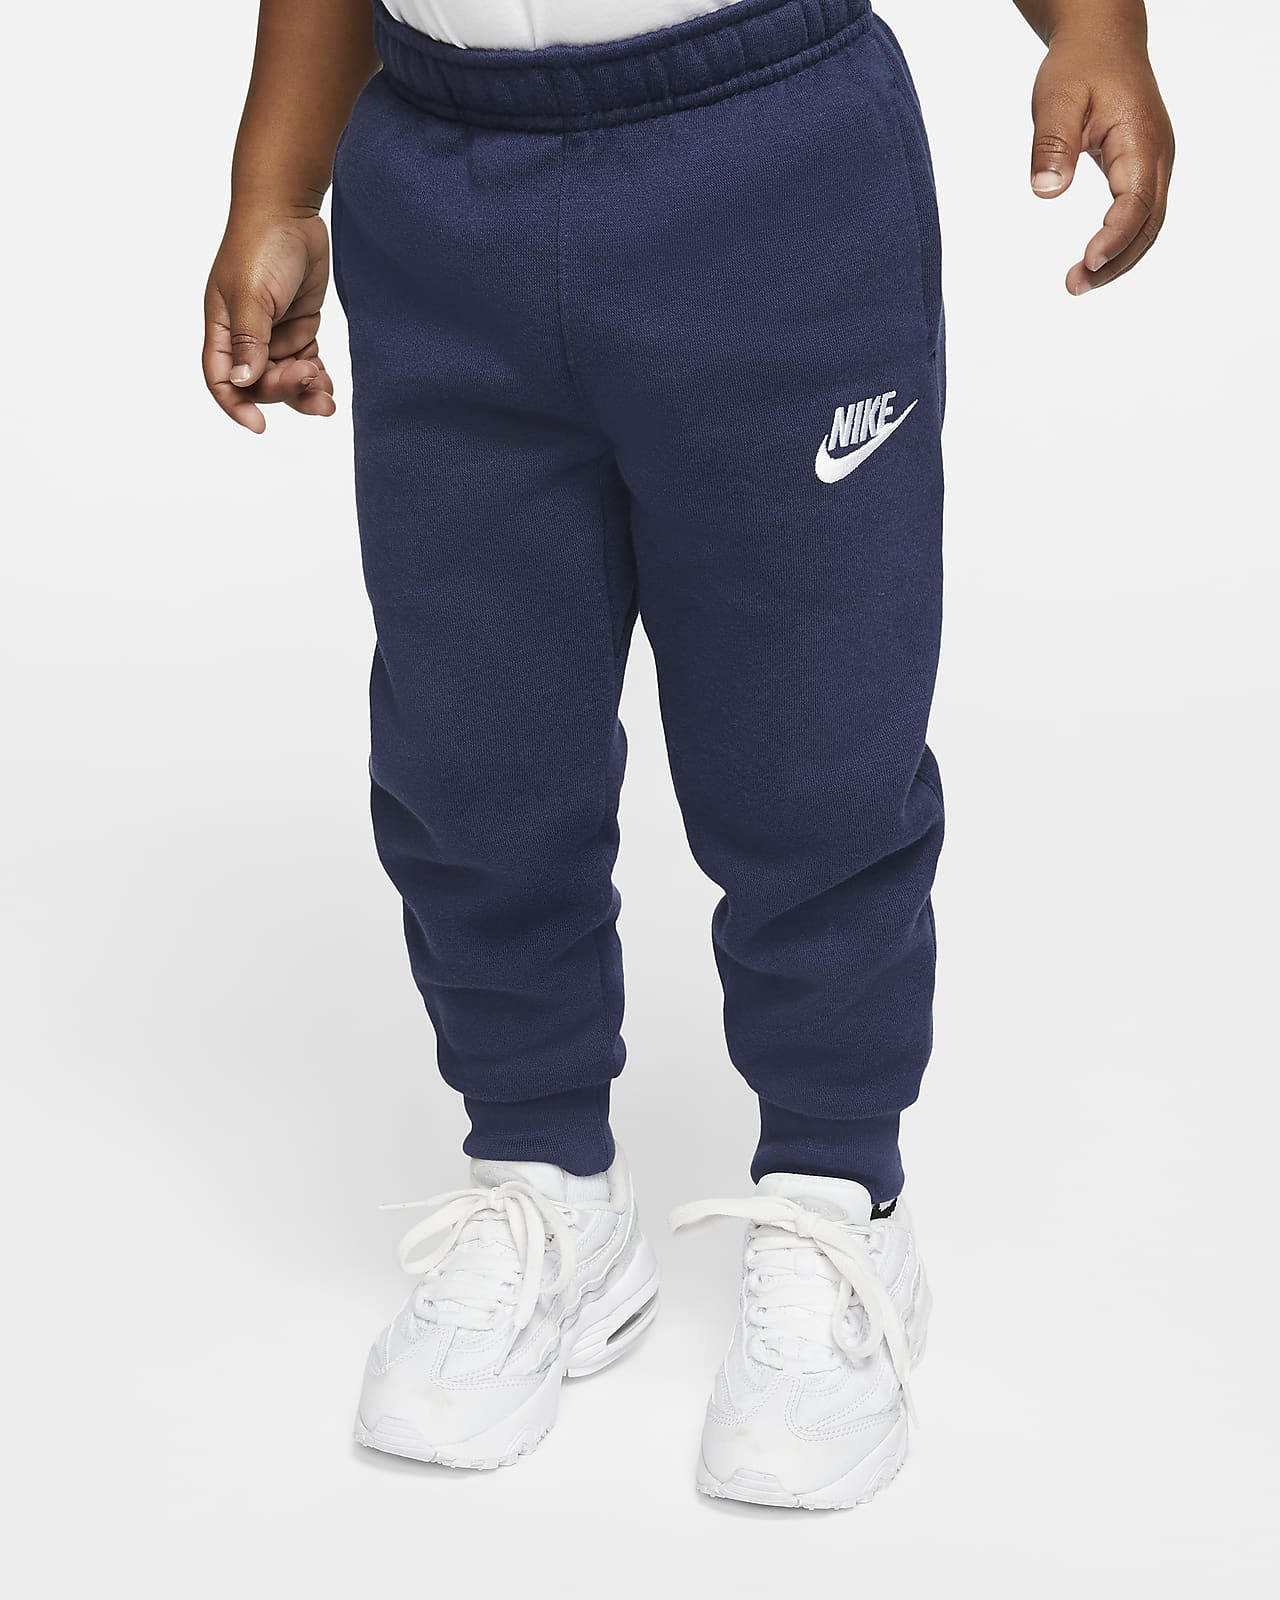 nike outfits for toddlers